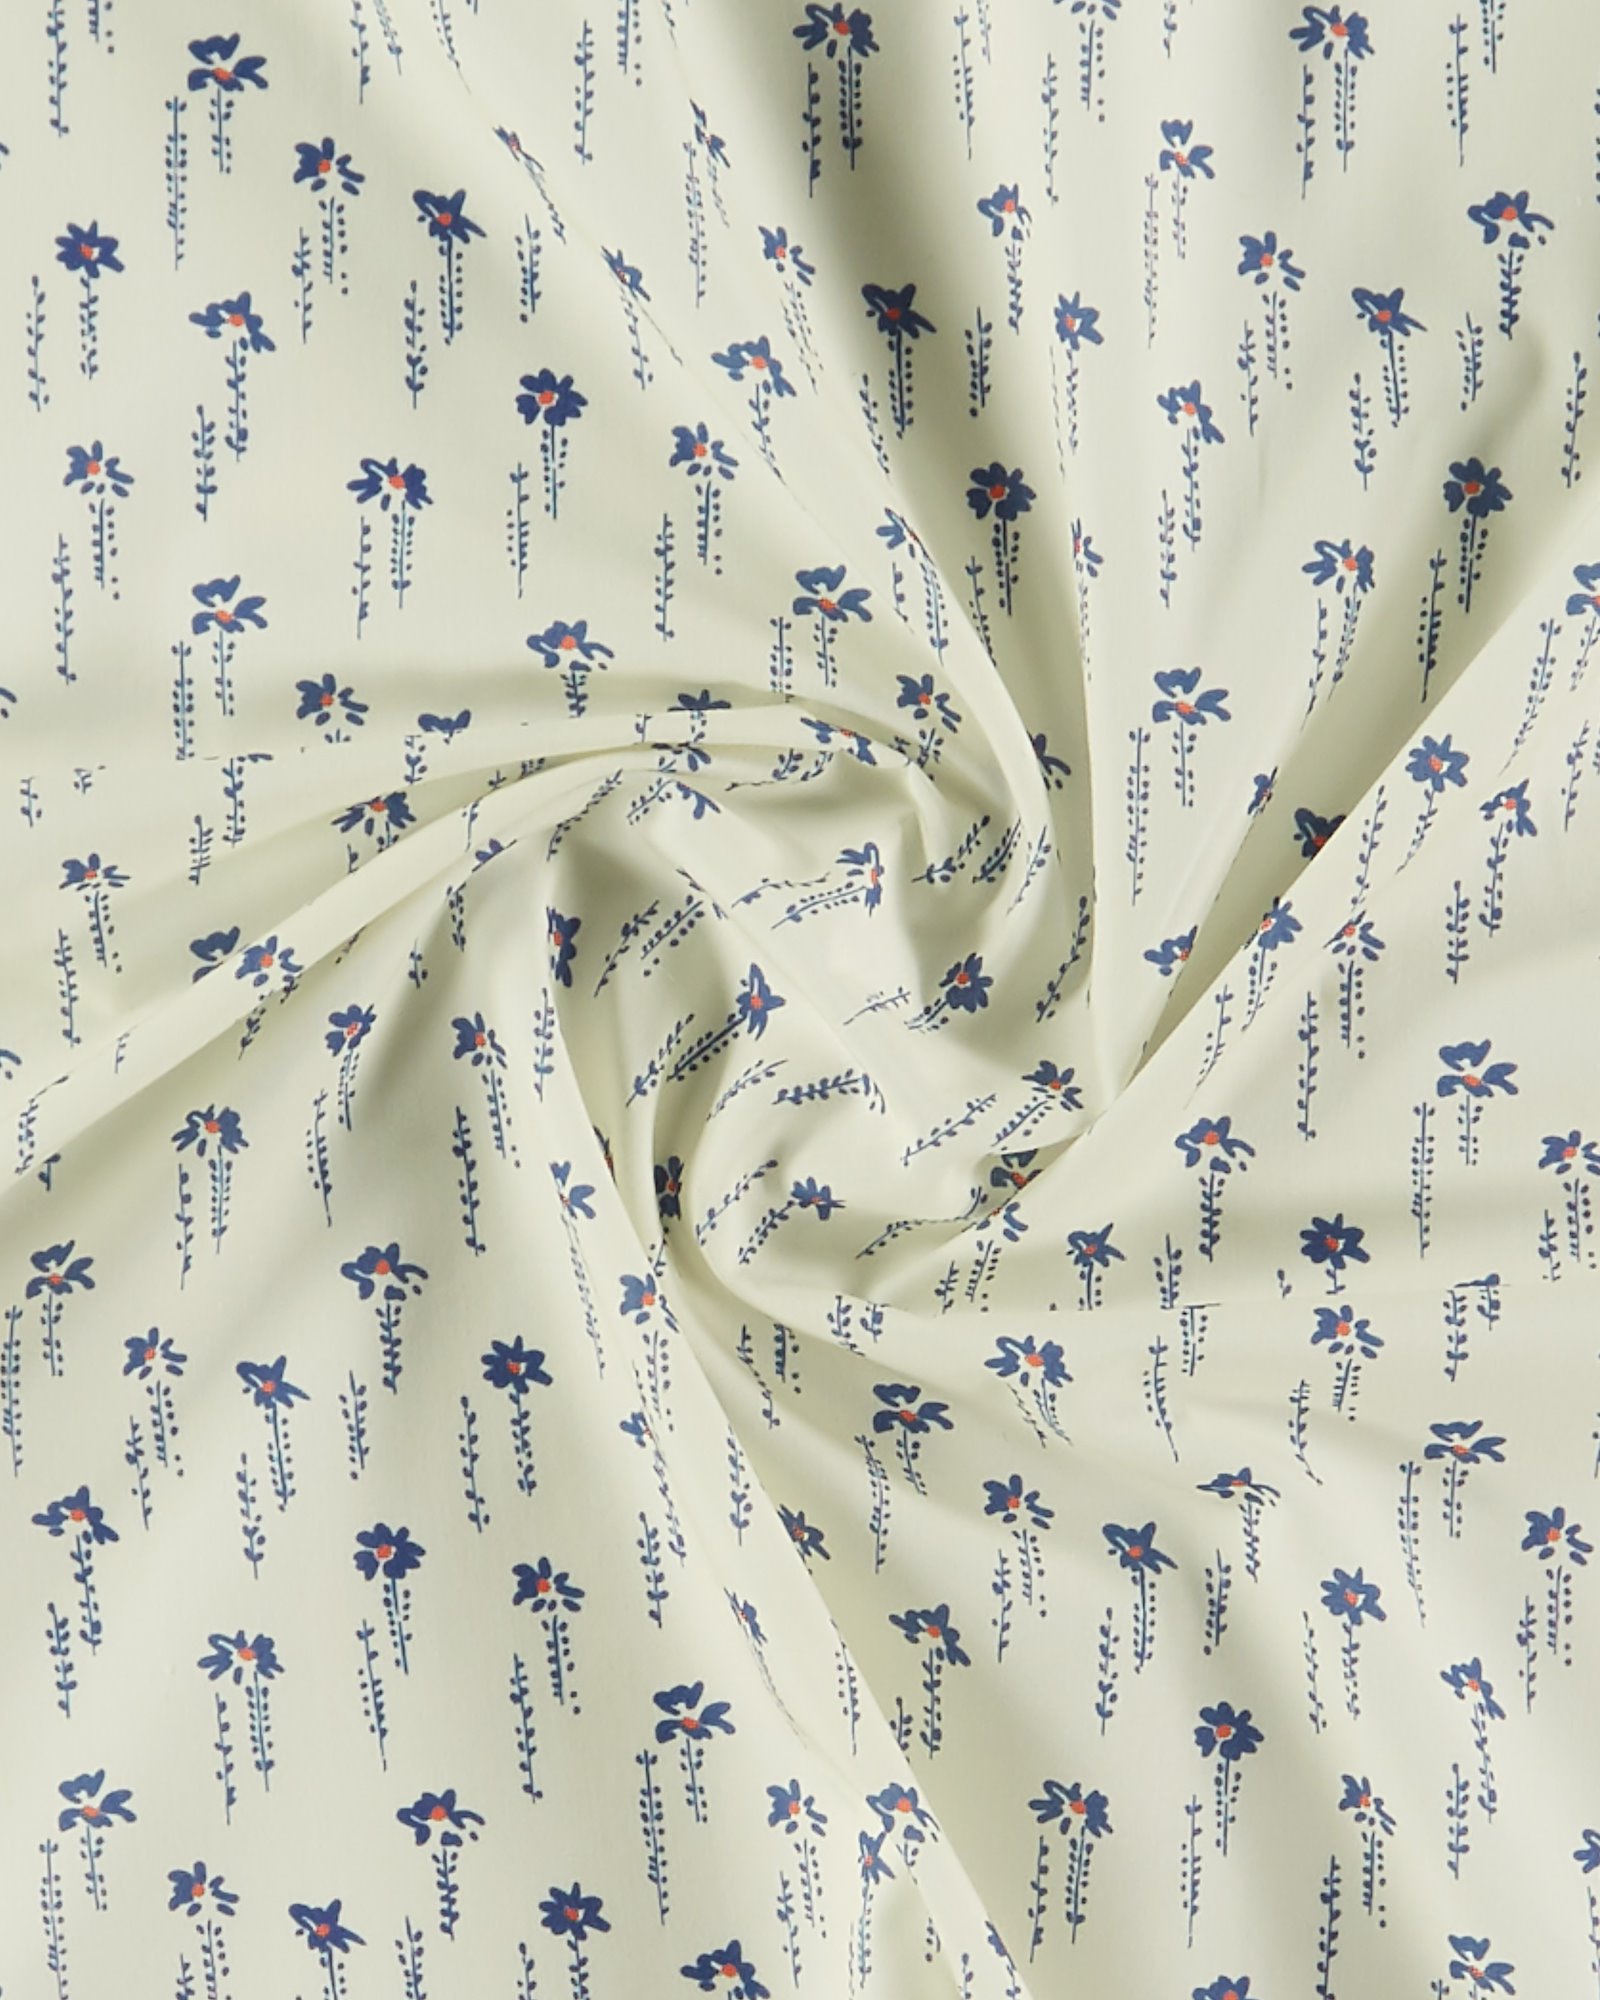 Cotton poplin offwhite with blue flowers 540139_pack